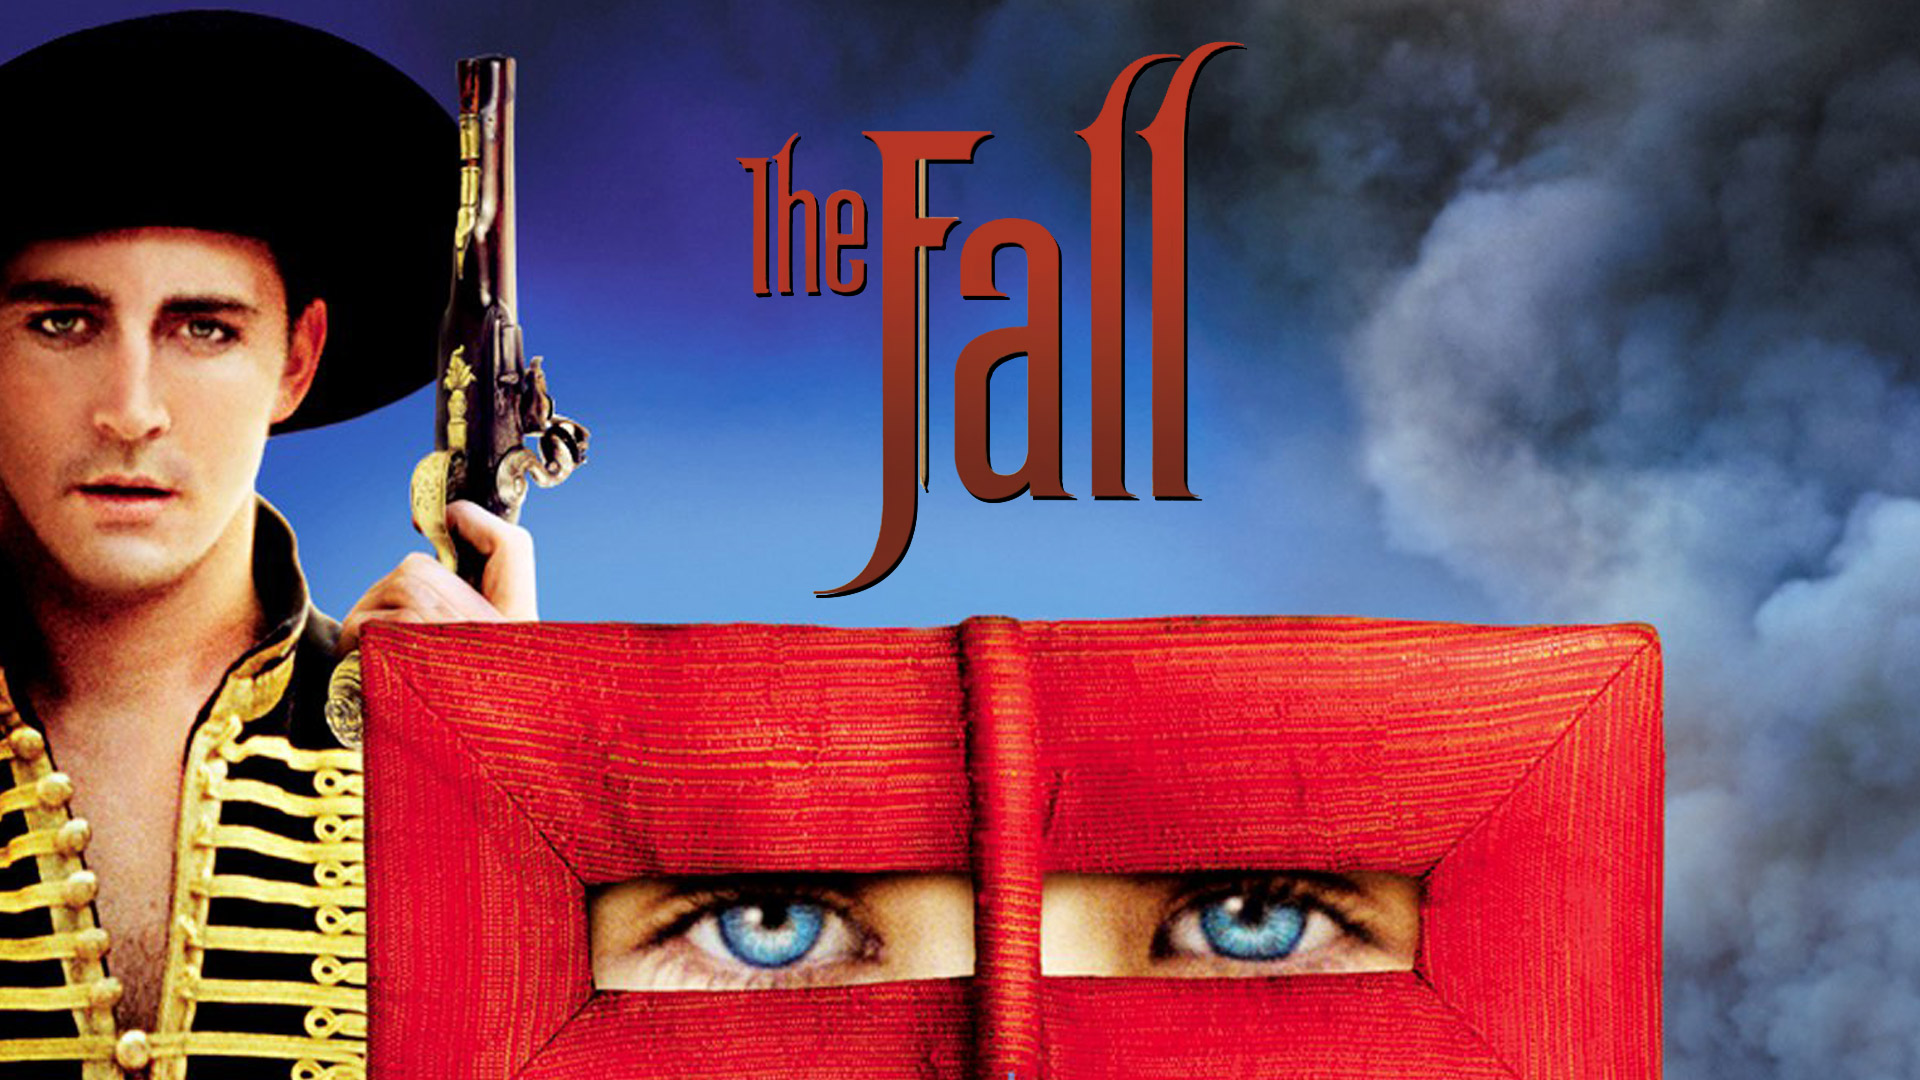 https://facts.net/wp-content/uploads/2023/06/35-facts-about-the-movie-the-fall-1687668943.jpg